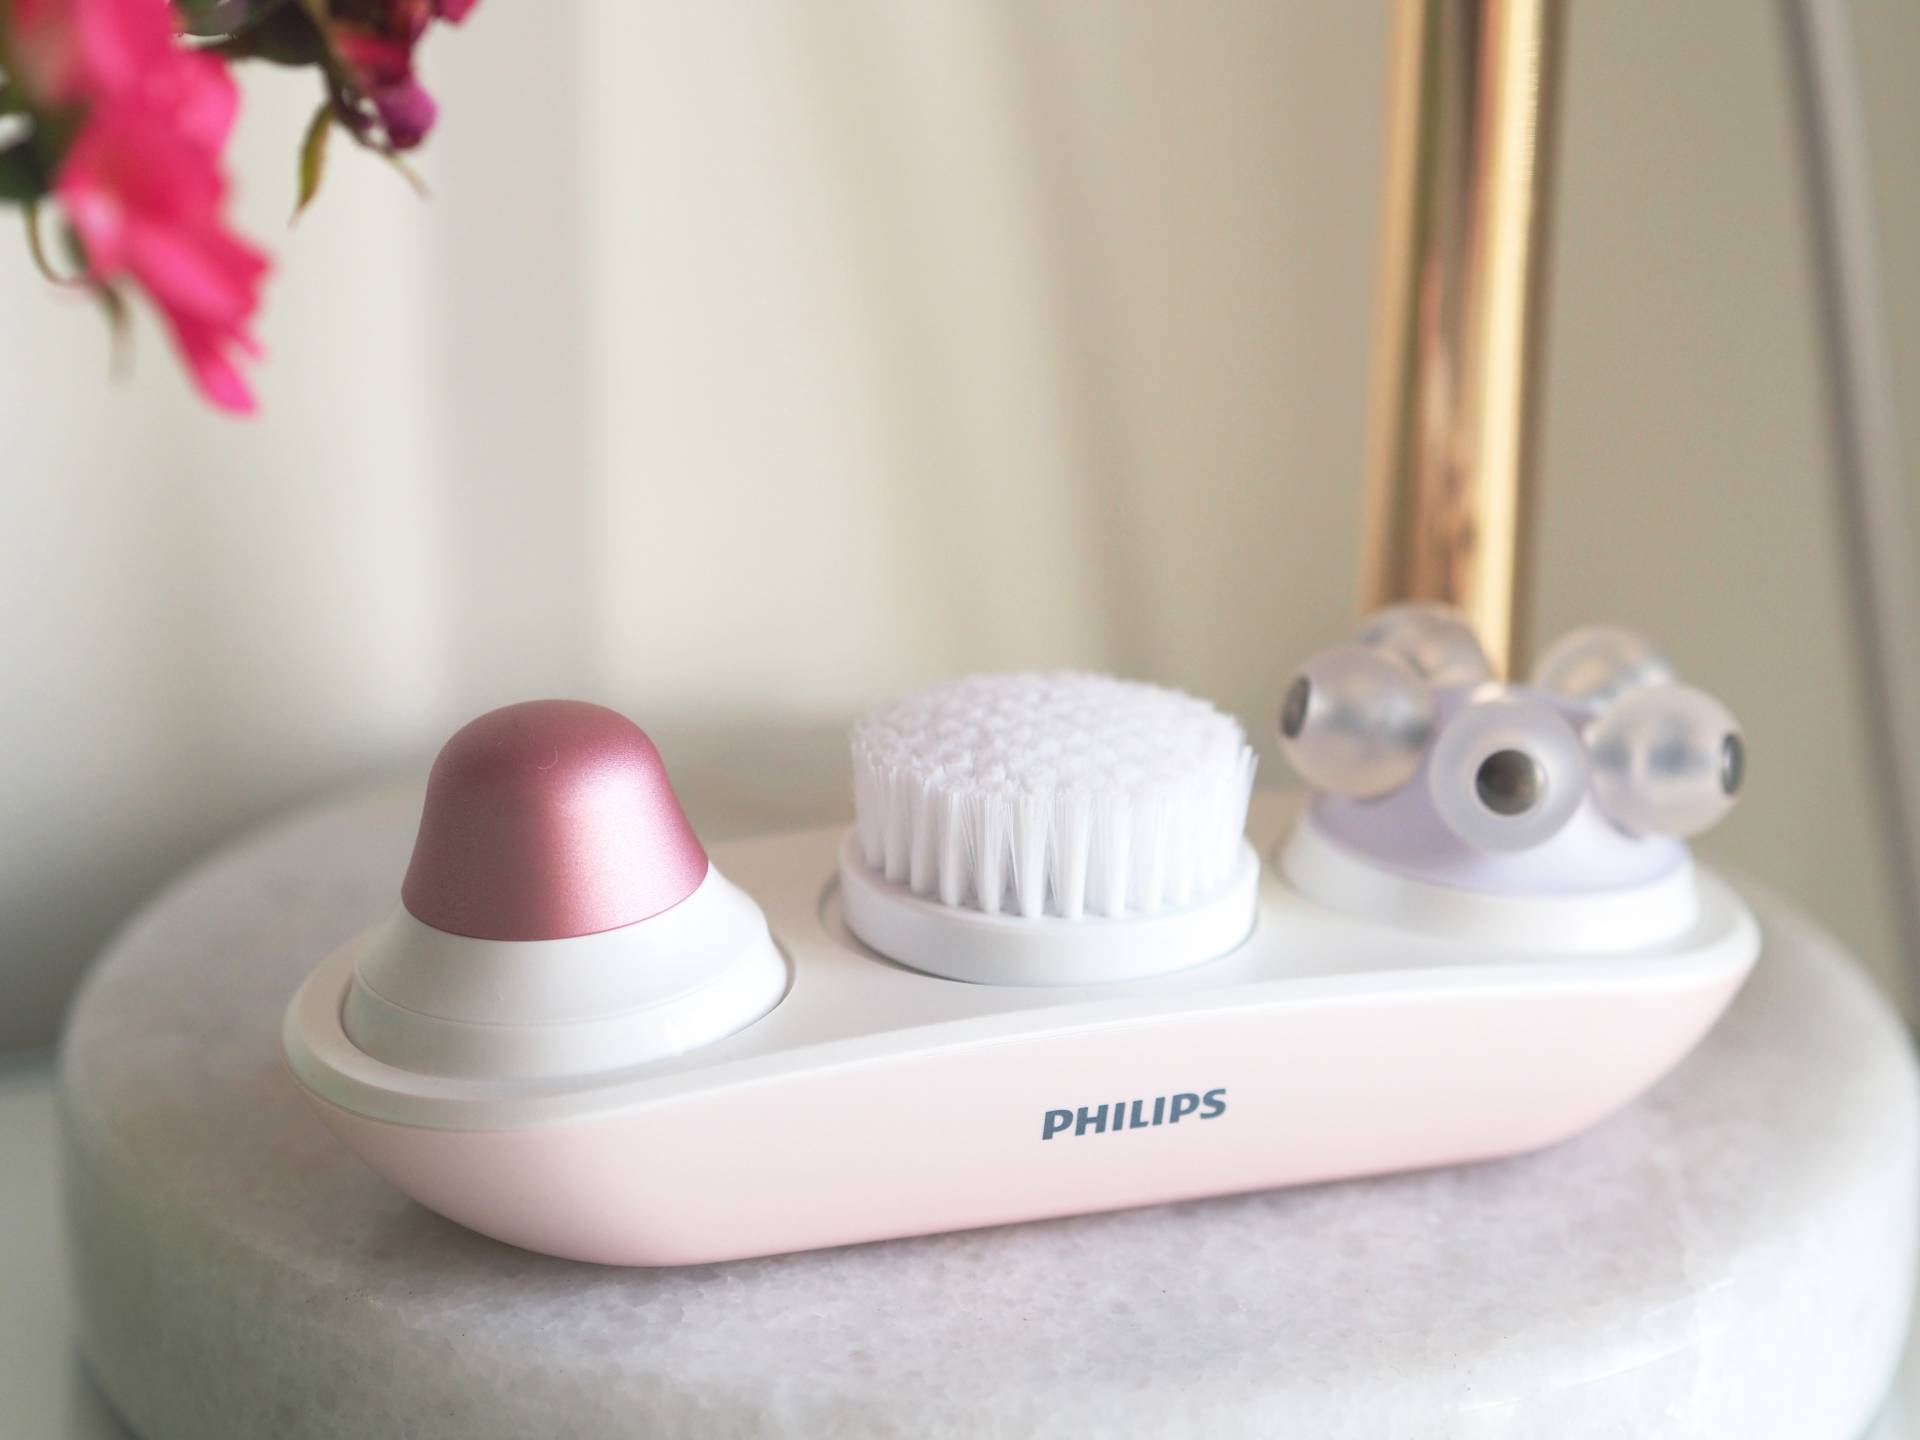 TREAT YOURSELF TO A LUXURIOUS AT HOME FACIAL | PHILIPS BEAUTY | Megan Taylor